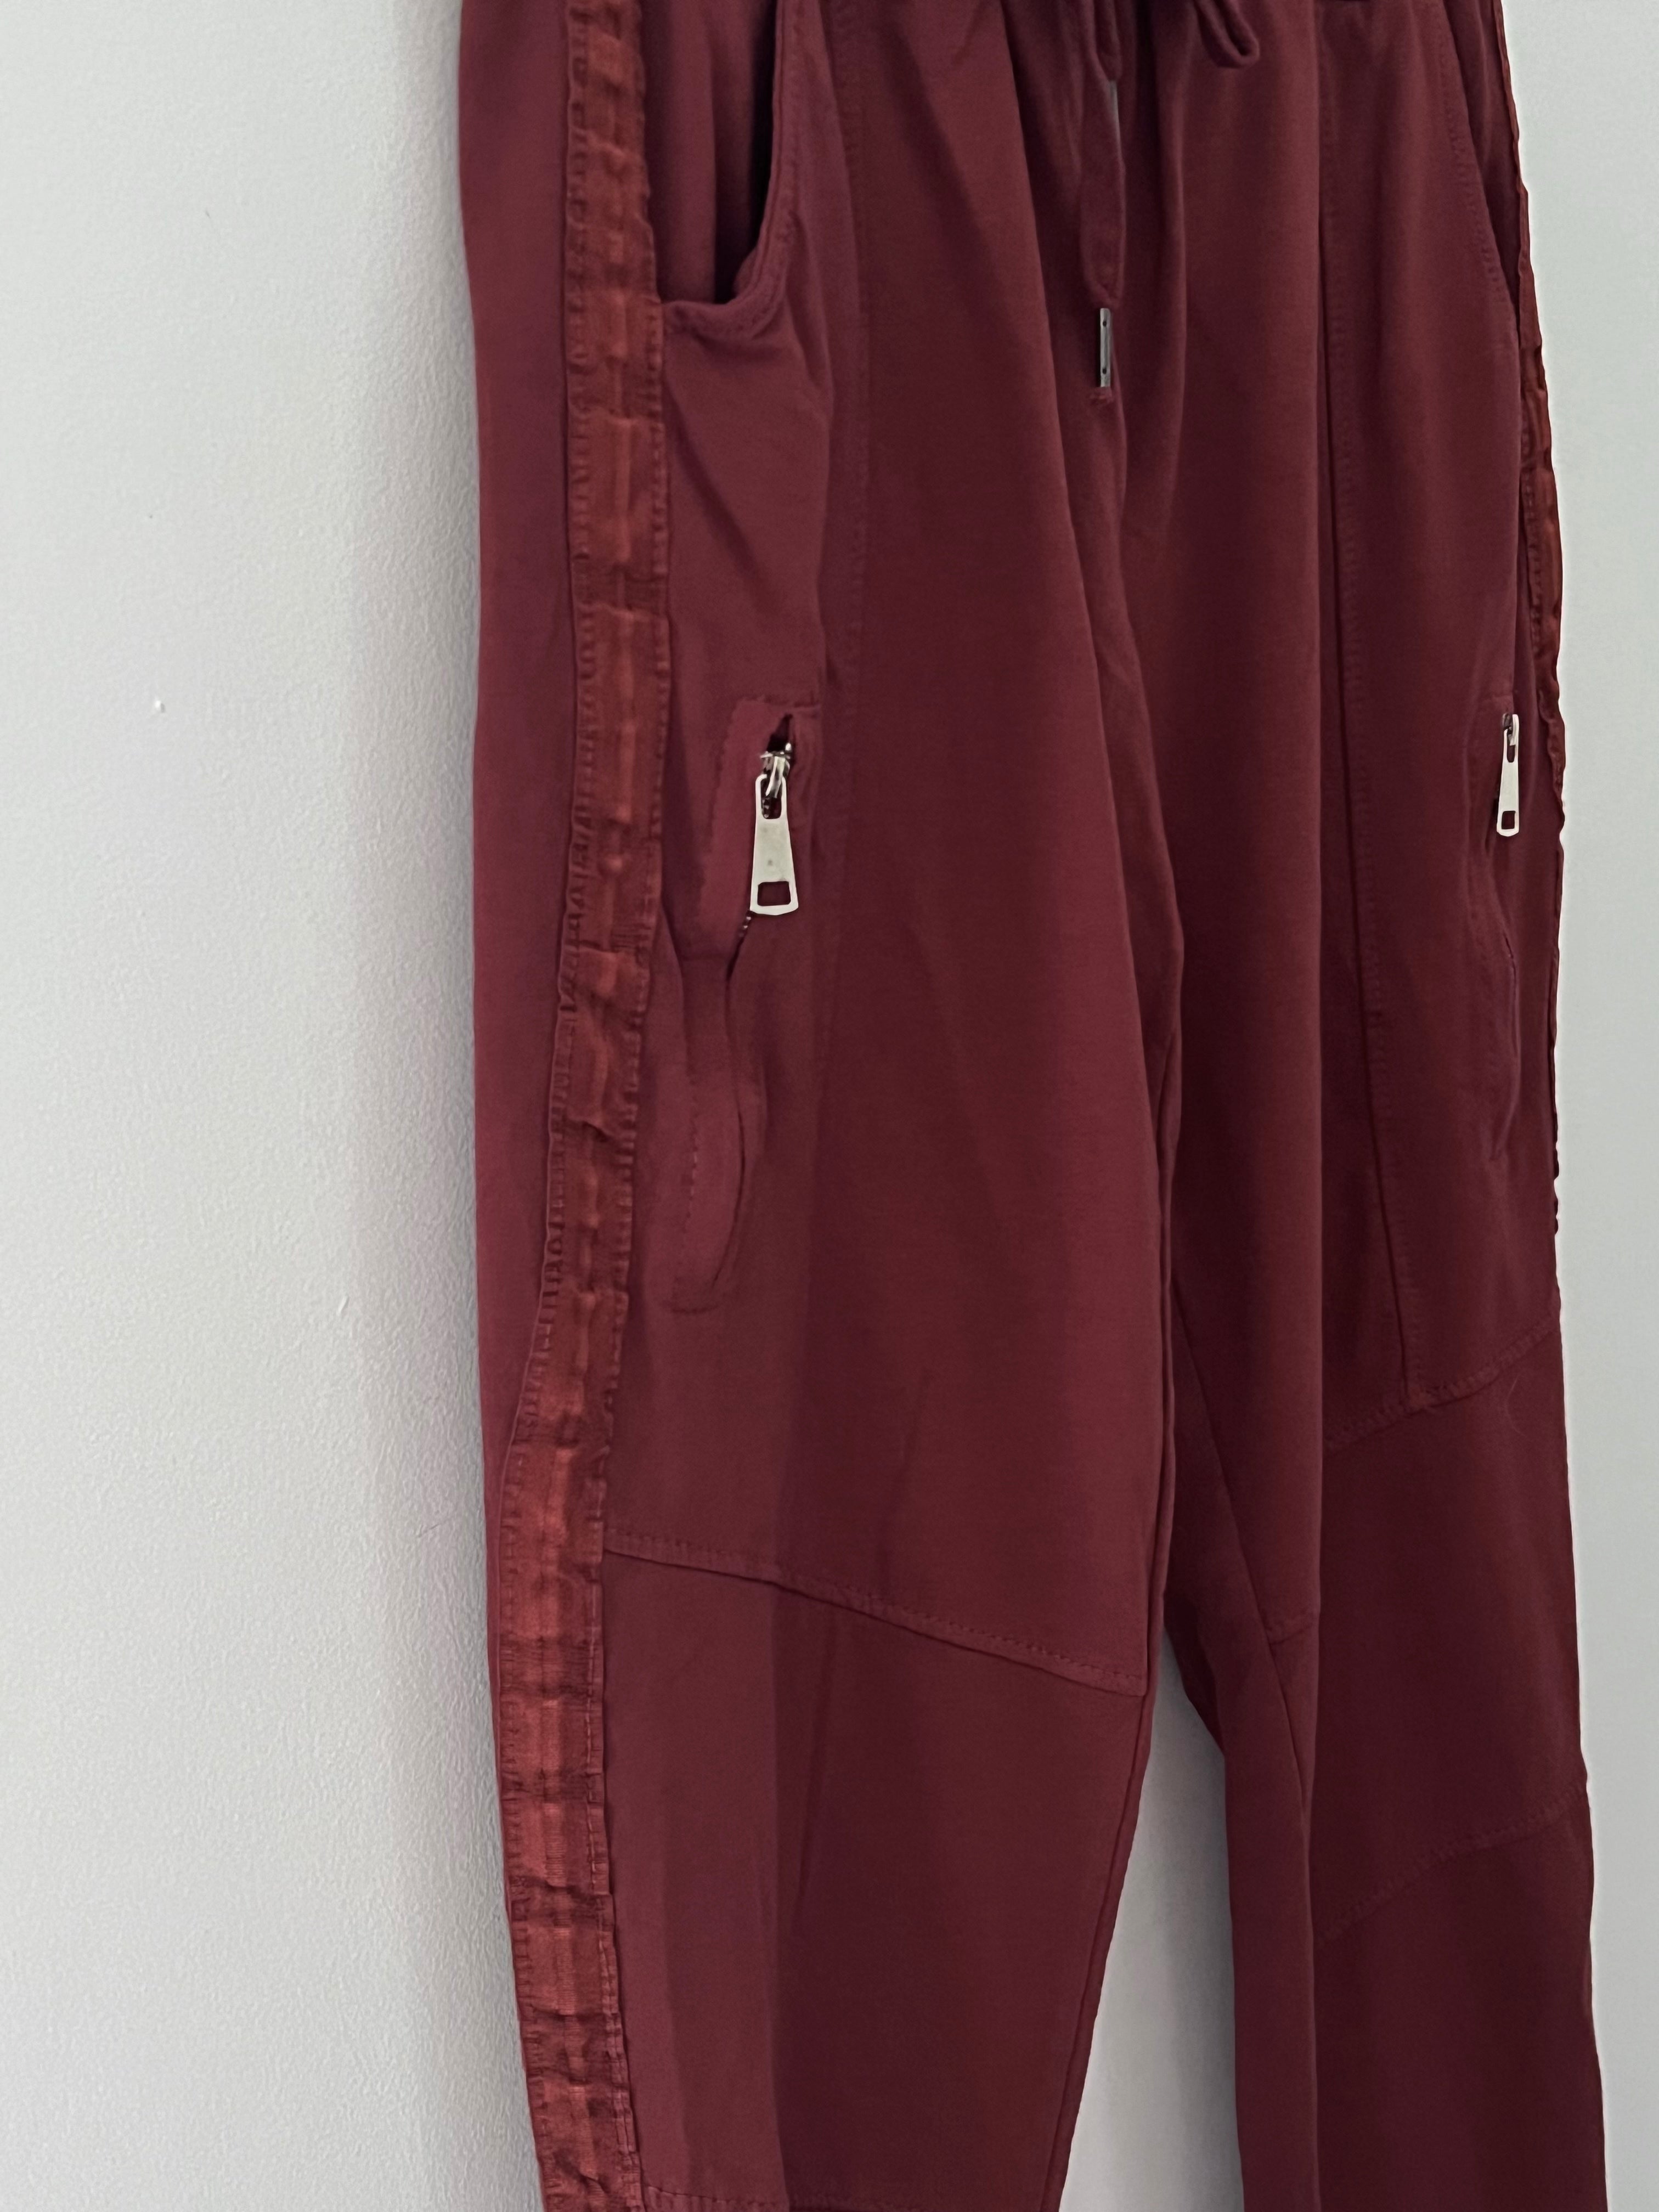 Jersey Stretch Joggers in Spice